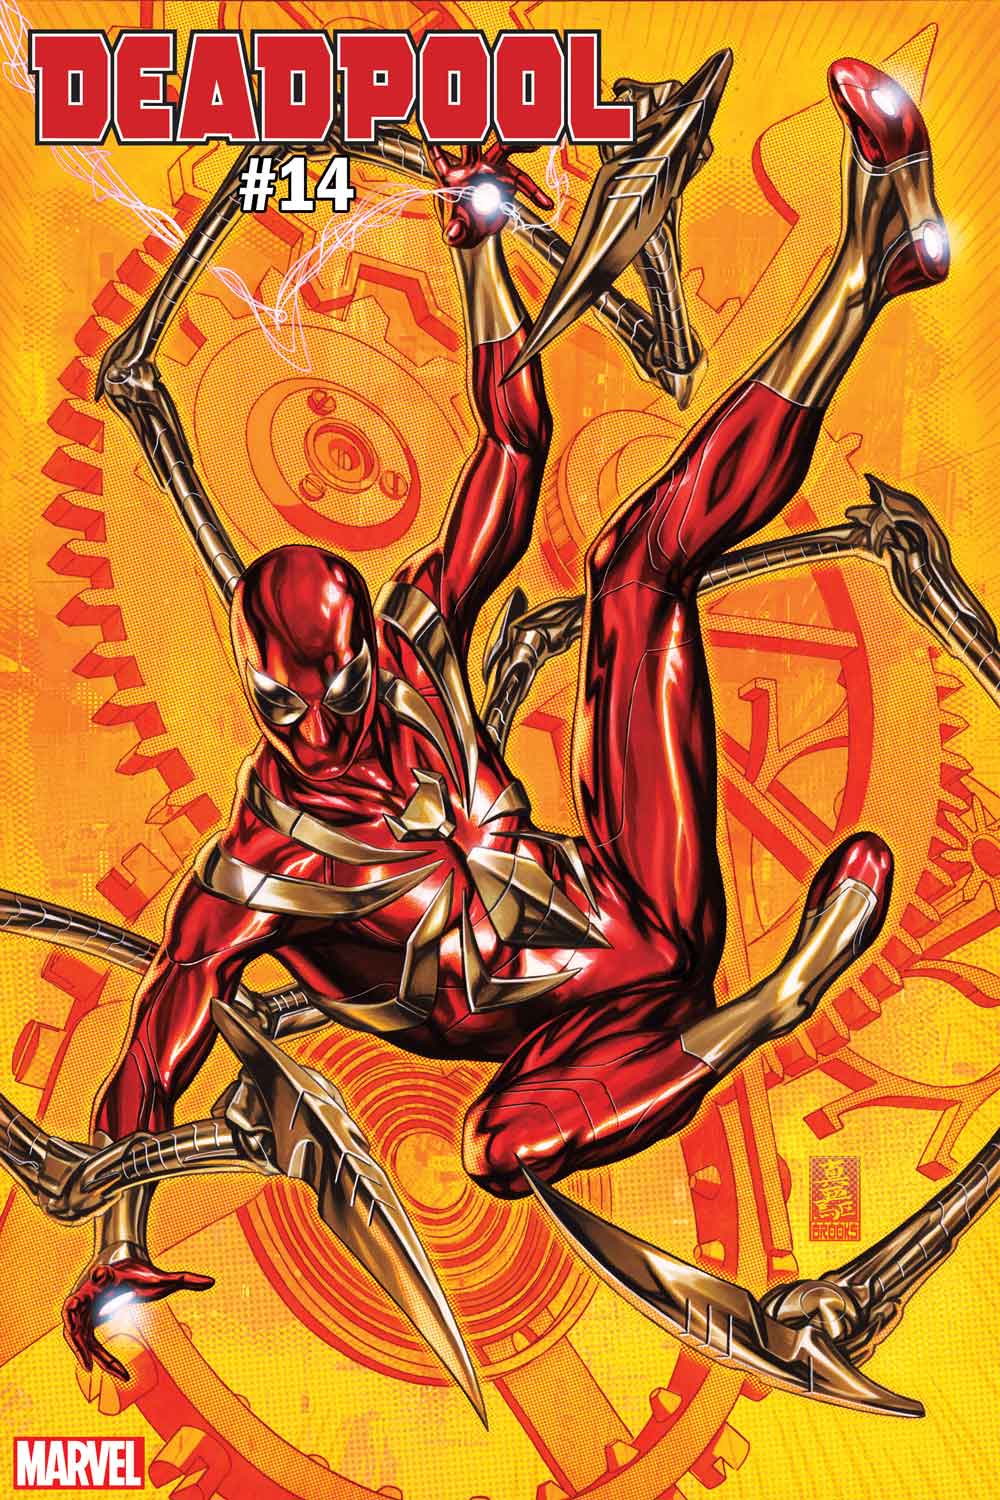 Check out the sweet Spider-Man suit variant covers out June 2019